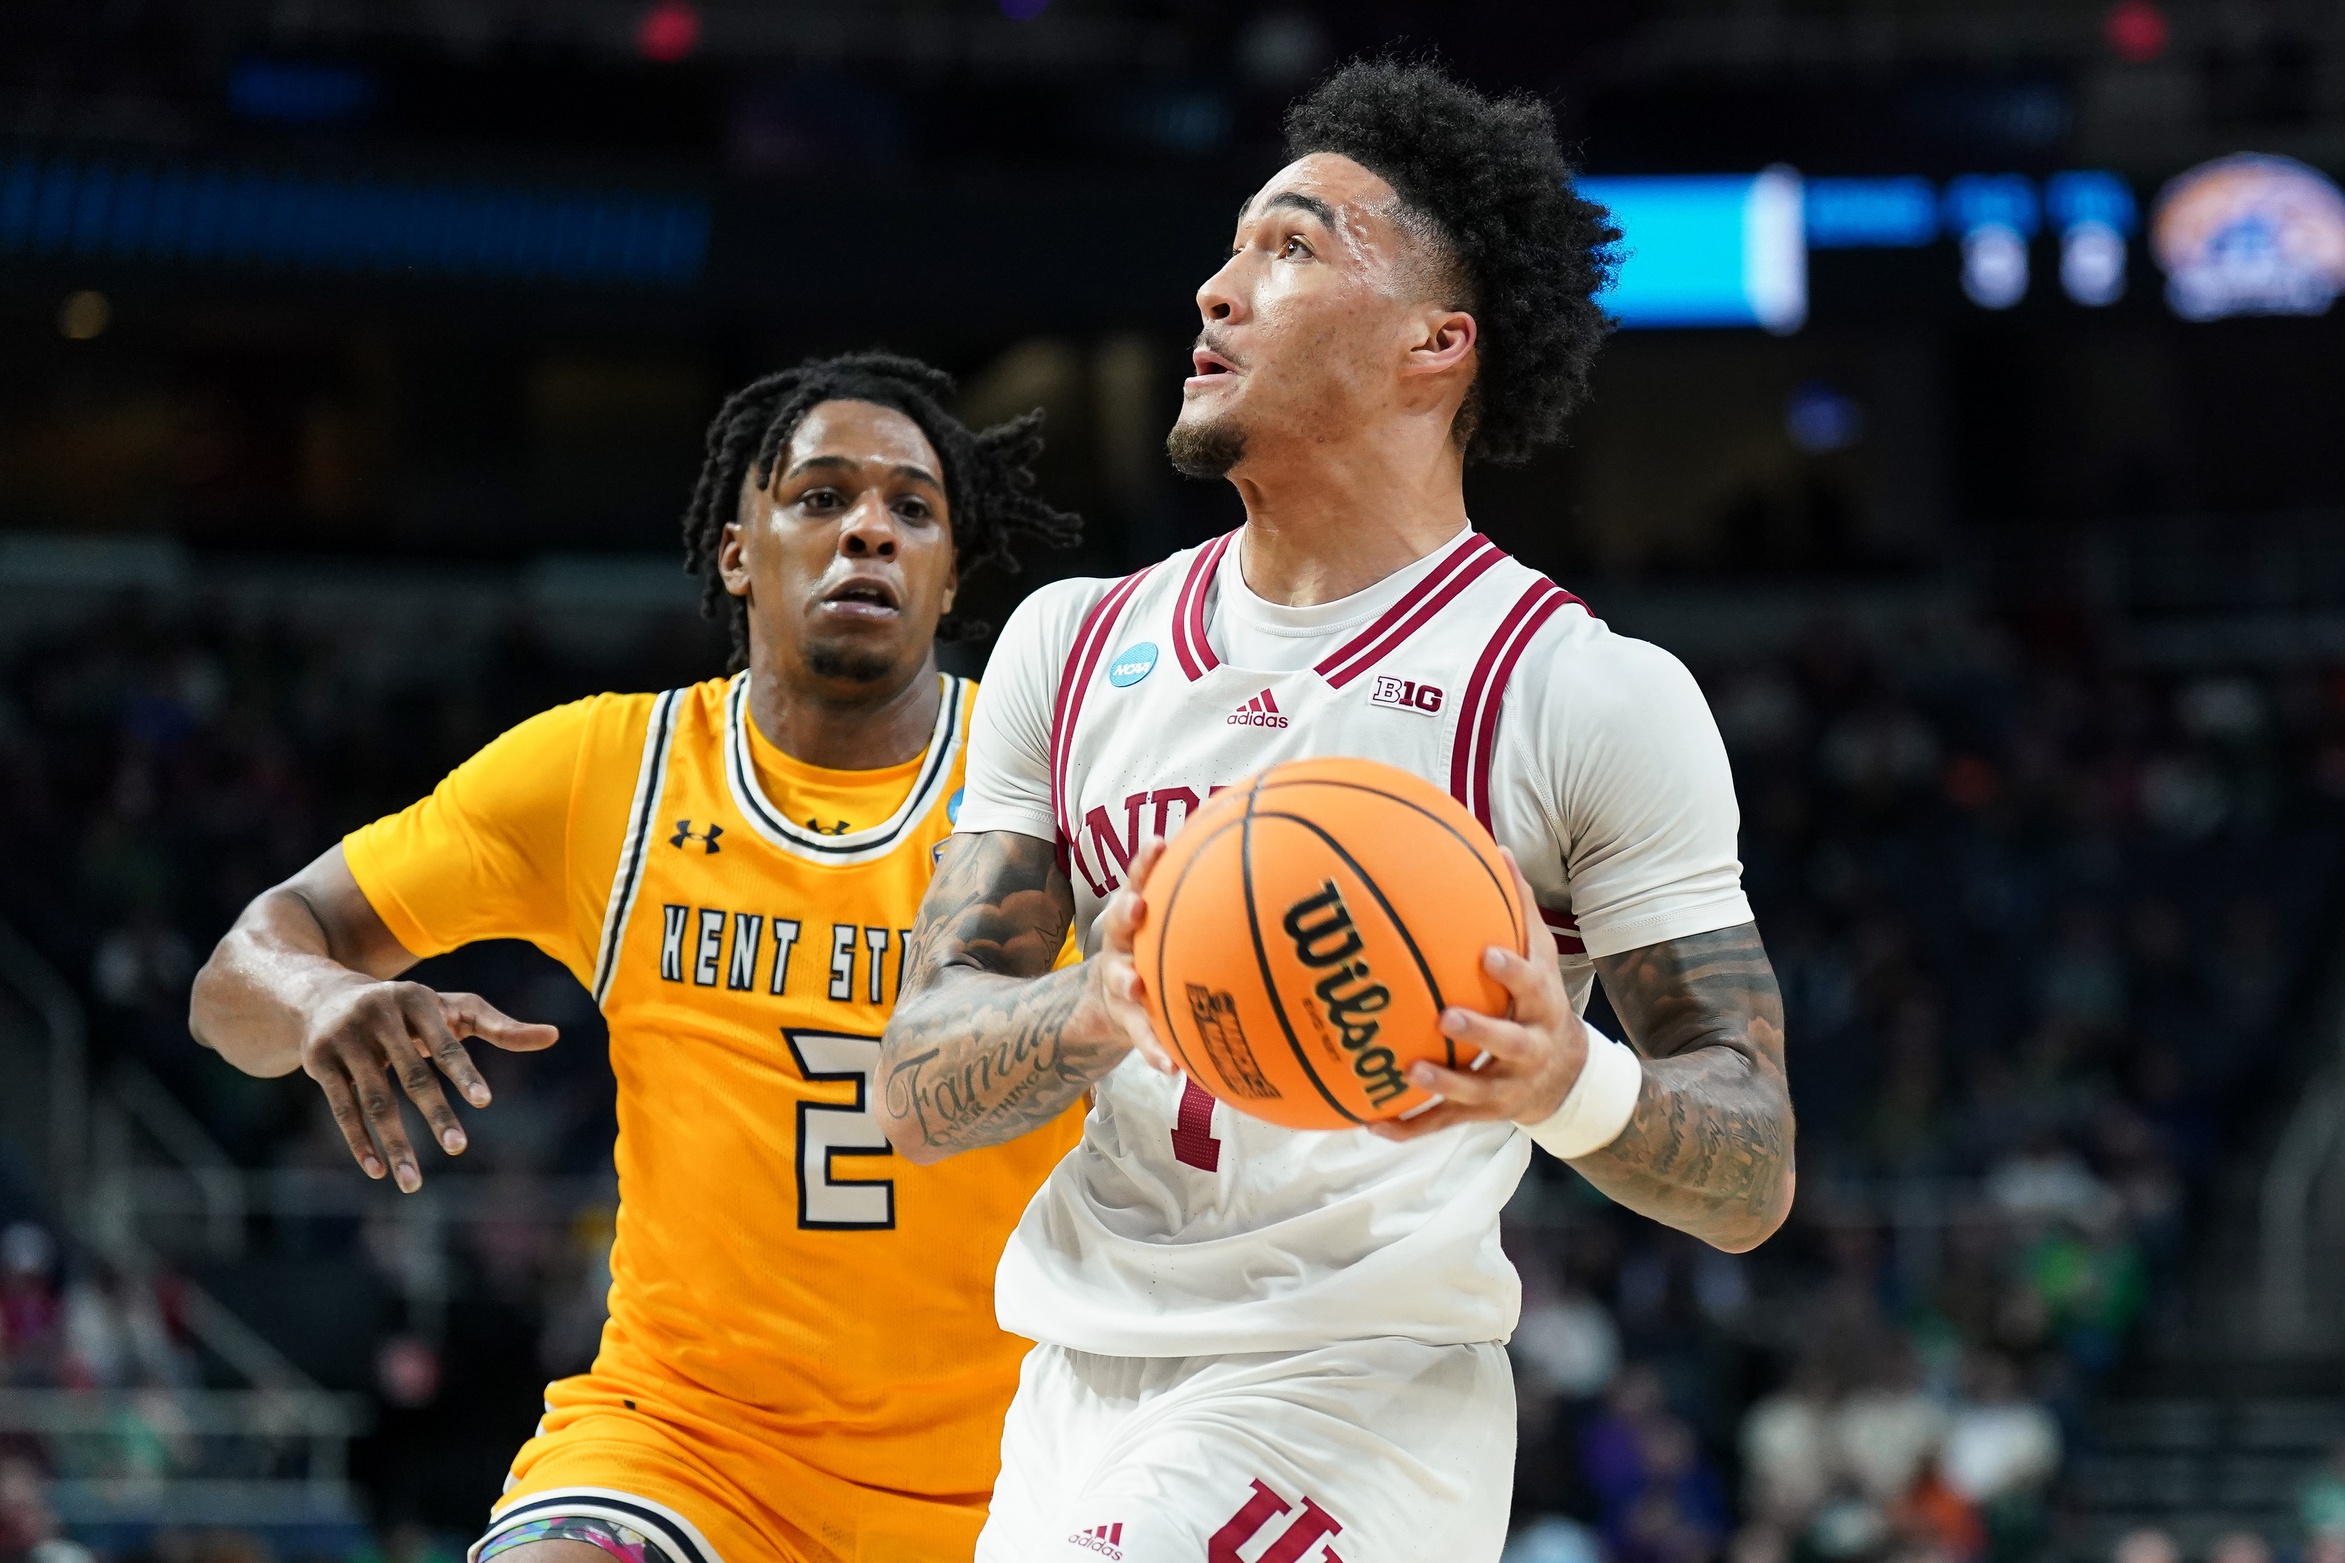 Mar 17, 2023; Albany, NY, USA; Indiana Hoosiers guard Jalen Hood-Schifino (1) controls the ball ahead of Kent State Golden Flashes guard Malique Jacobs (2) in the second half at MVP Arena. Mandatory Credit: David Butler II-USA TODAY Sports